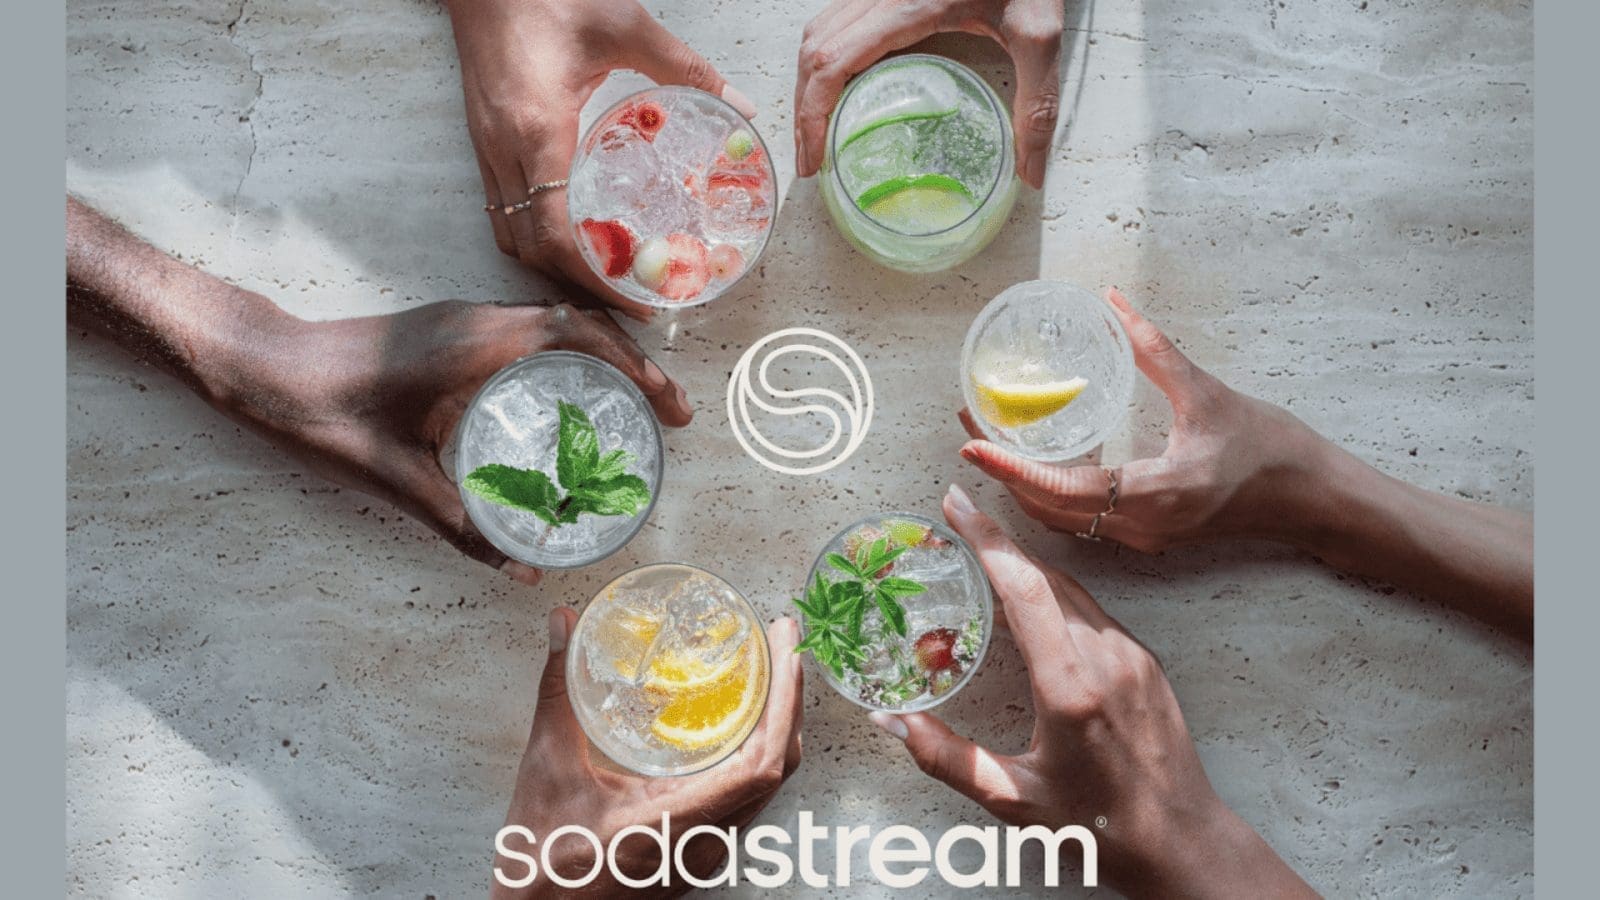 PepsiCo rebrands SodaStream to meet growing consumer’s interest in innovation and mixology